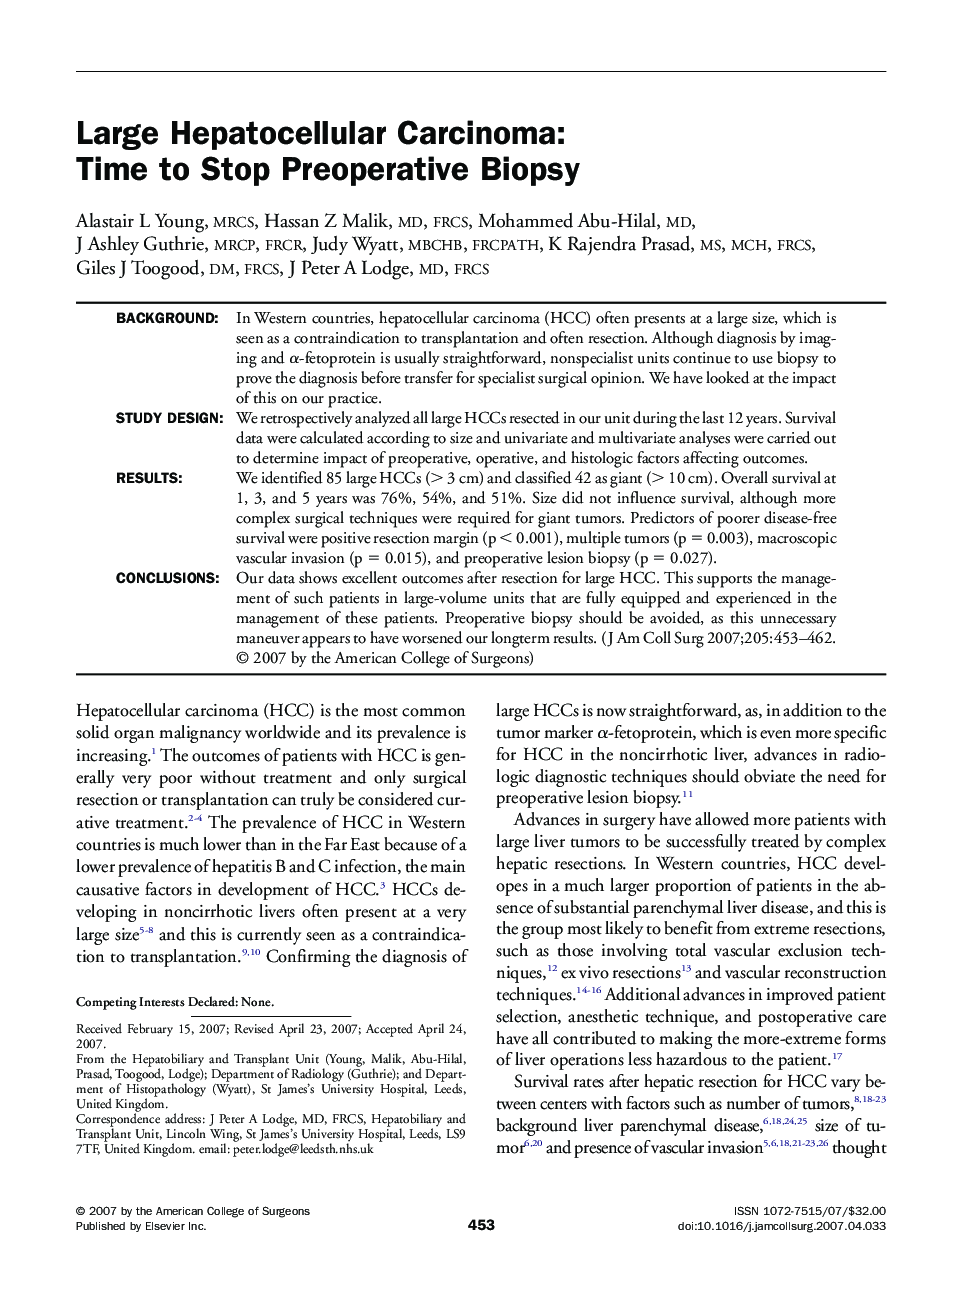 Large Hepatocellular Carcinoma: Time to Stop Preoperative Biopsy